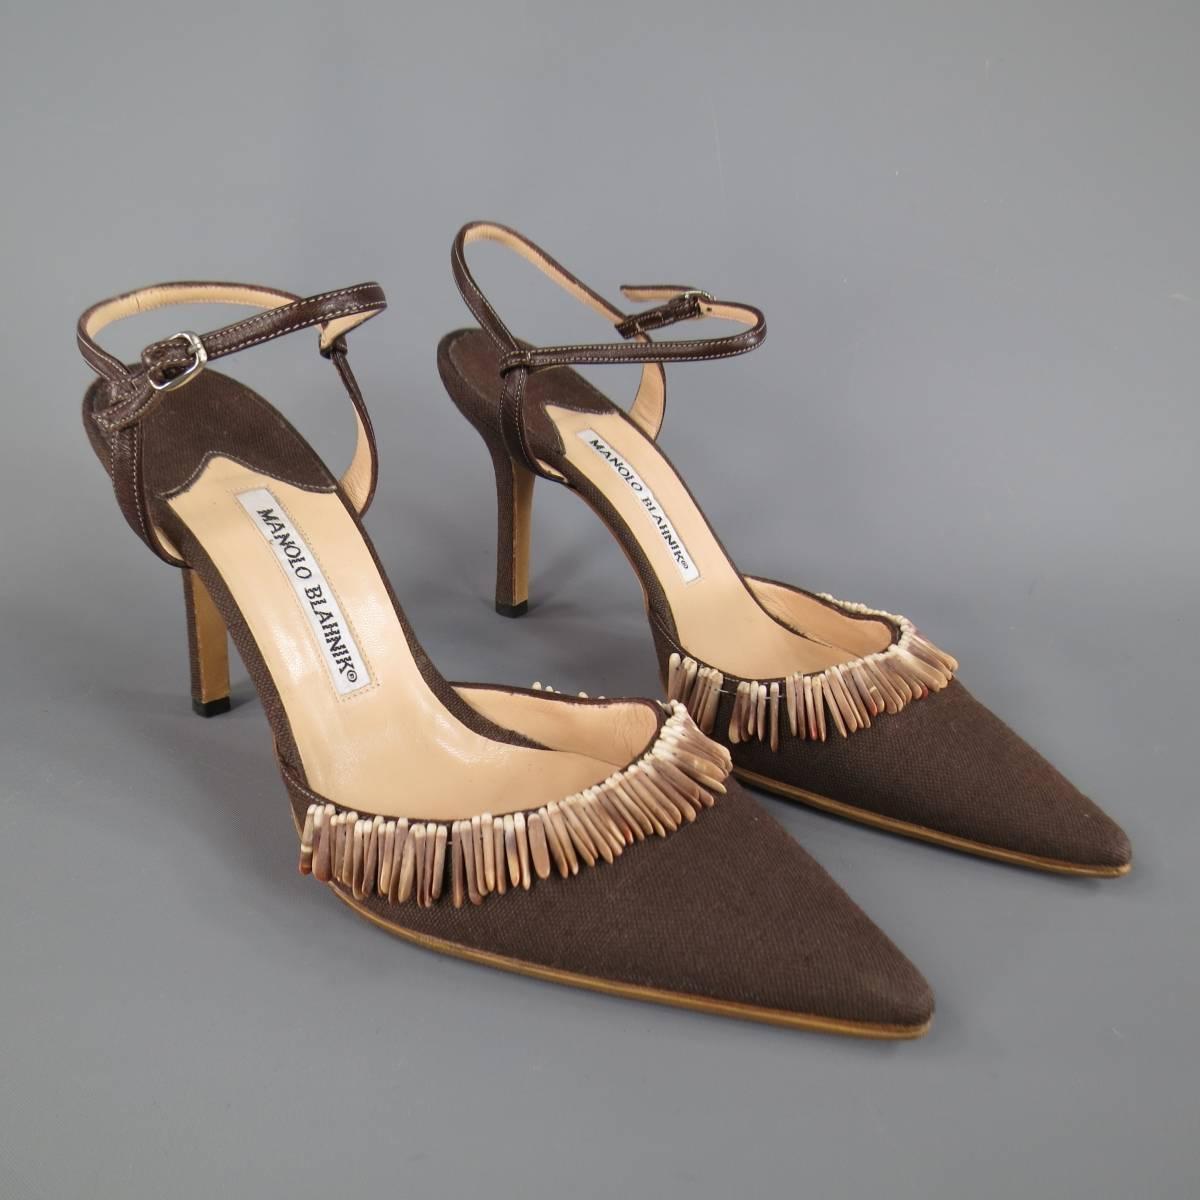 Lovely MANOLO BLAHNIK pumps in brown canvas with a leather ankle harness strap, covered stiletto heel, and pointed toe with sea shell embellishment. Resoled. Made in Italy.
 
Excellent Pre-Owned Condition.
Marked: IT 38
 
Heel: 4 in.